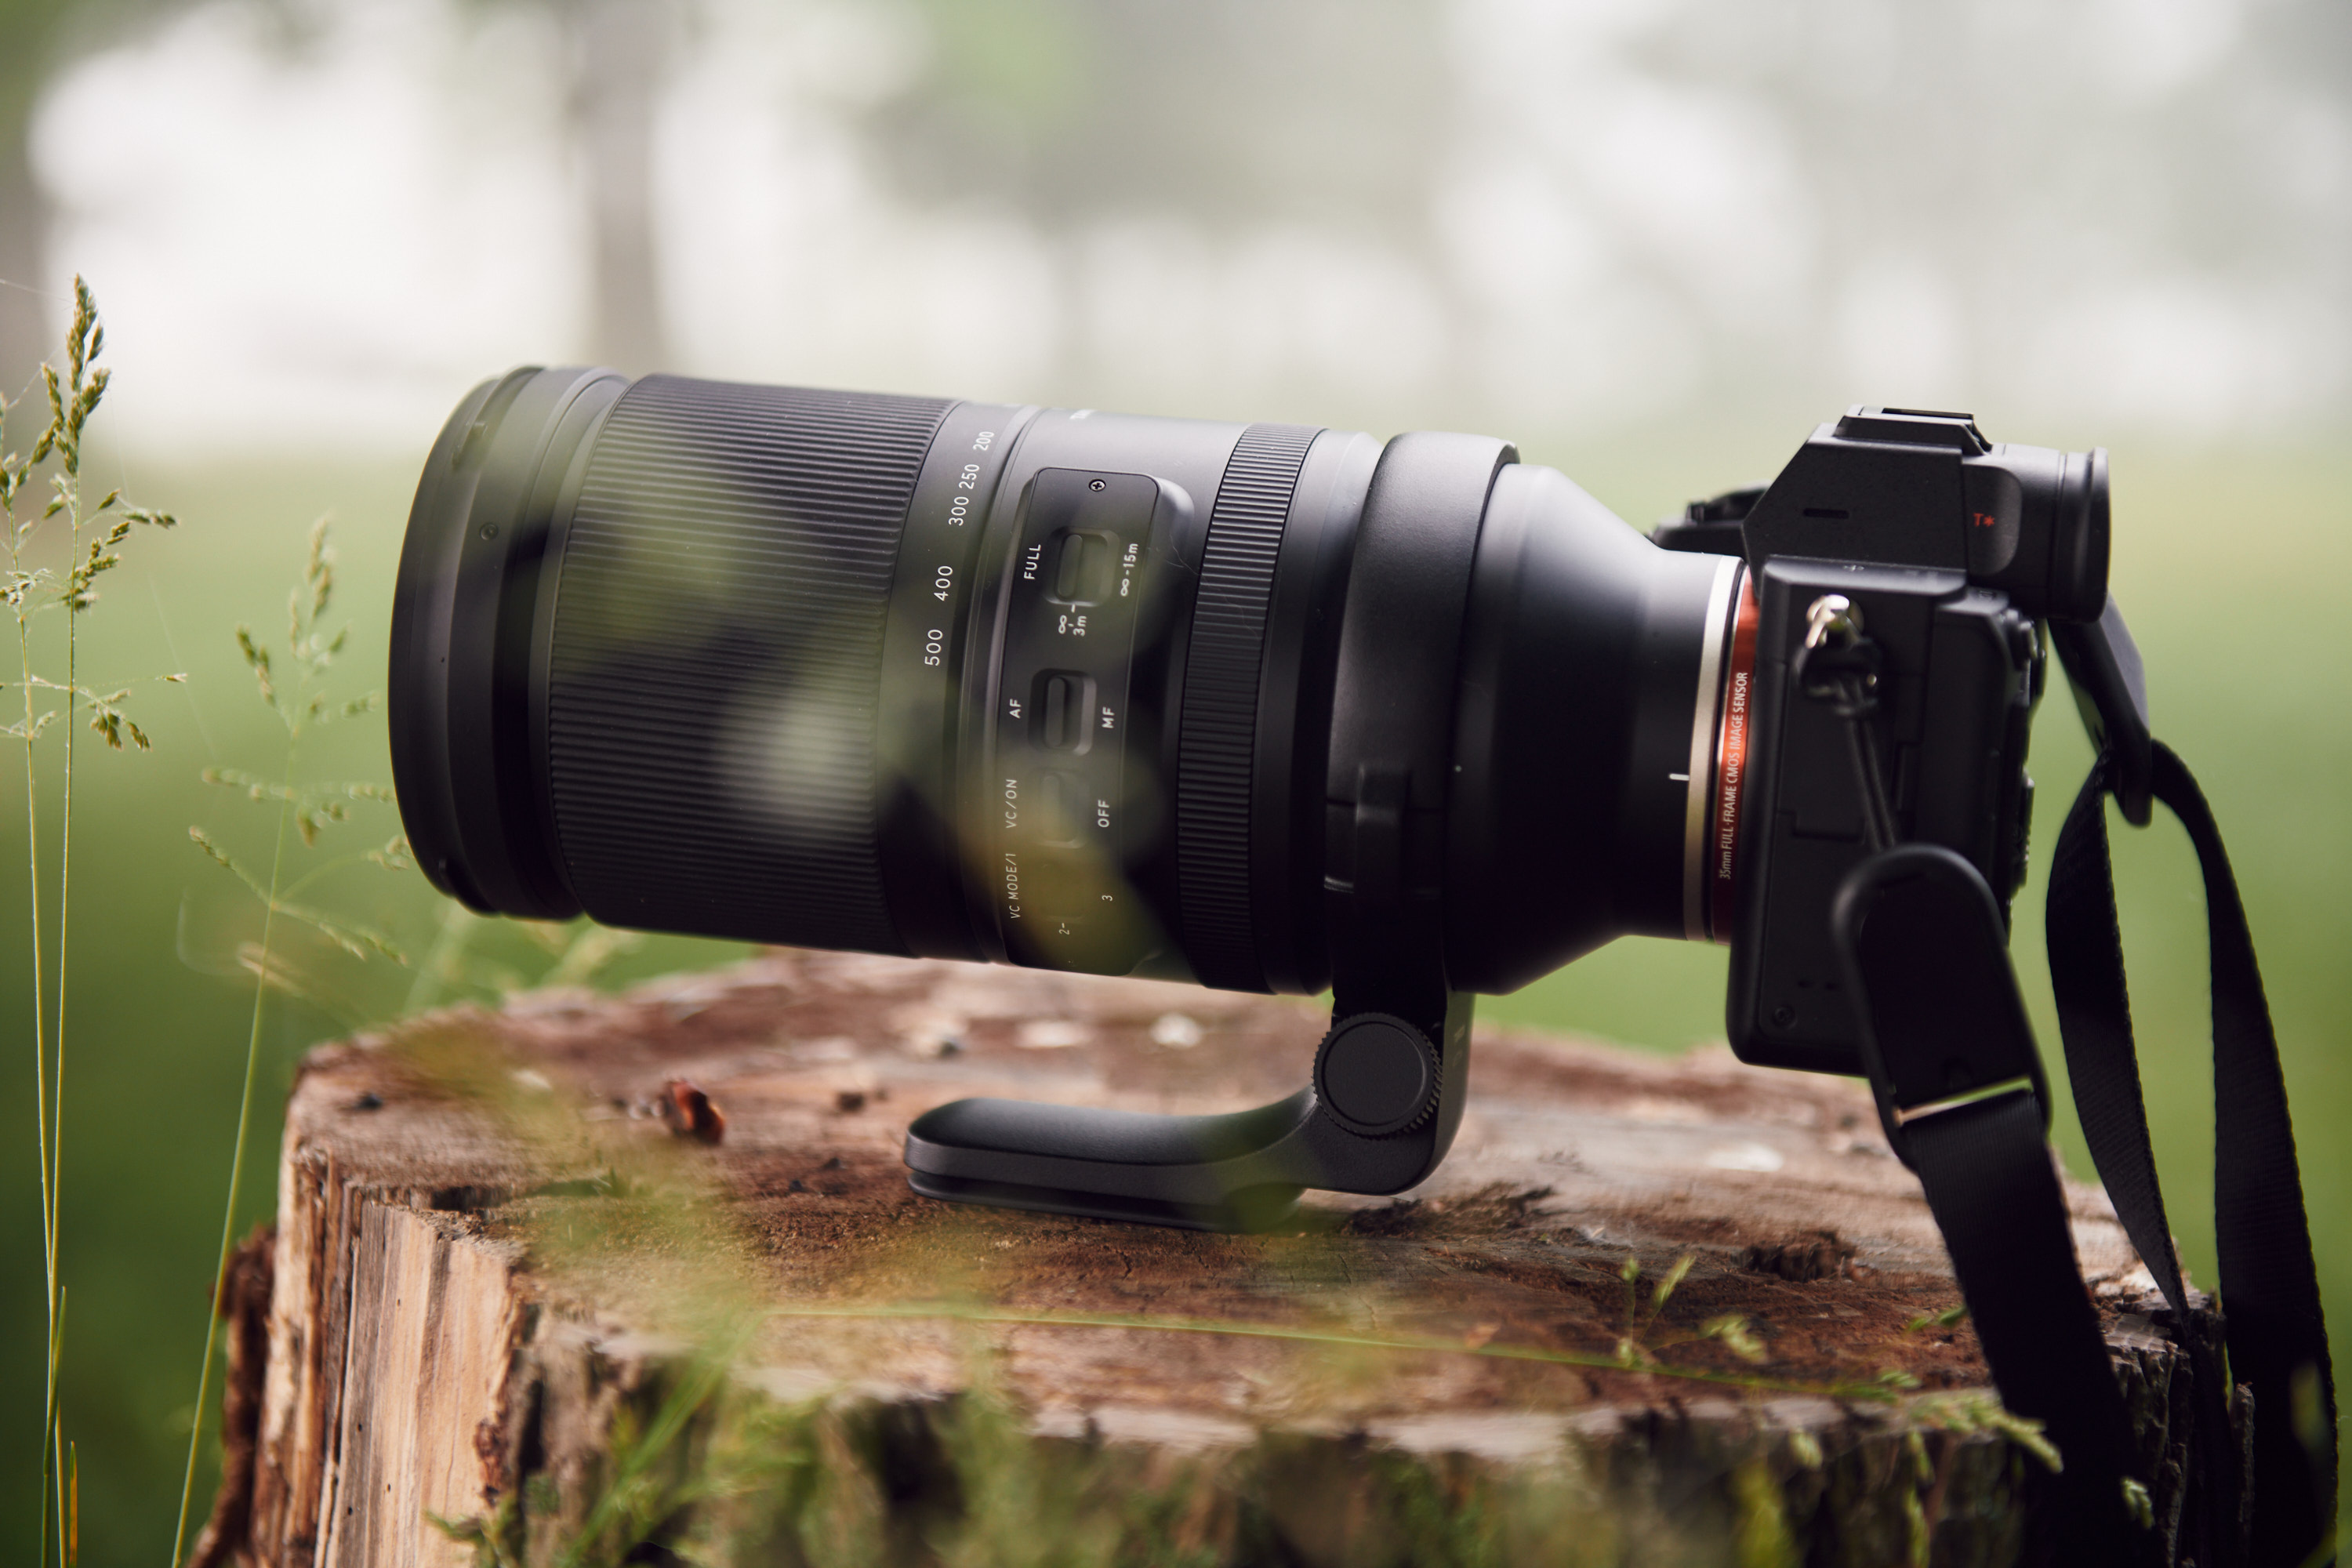 Tamron’s Best Lens for Bird Photography Has a Discount!